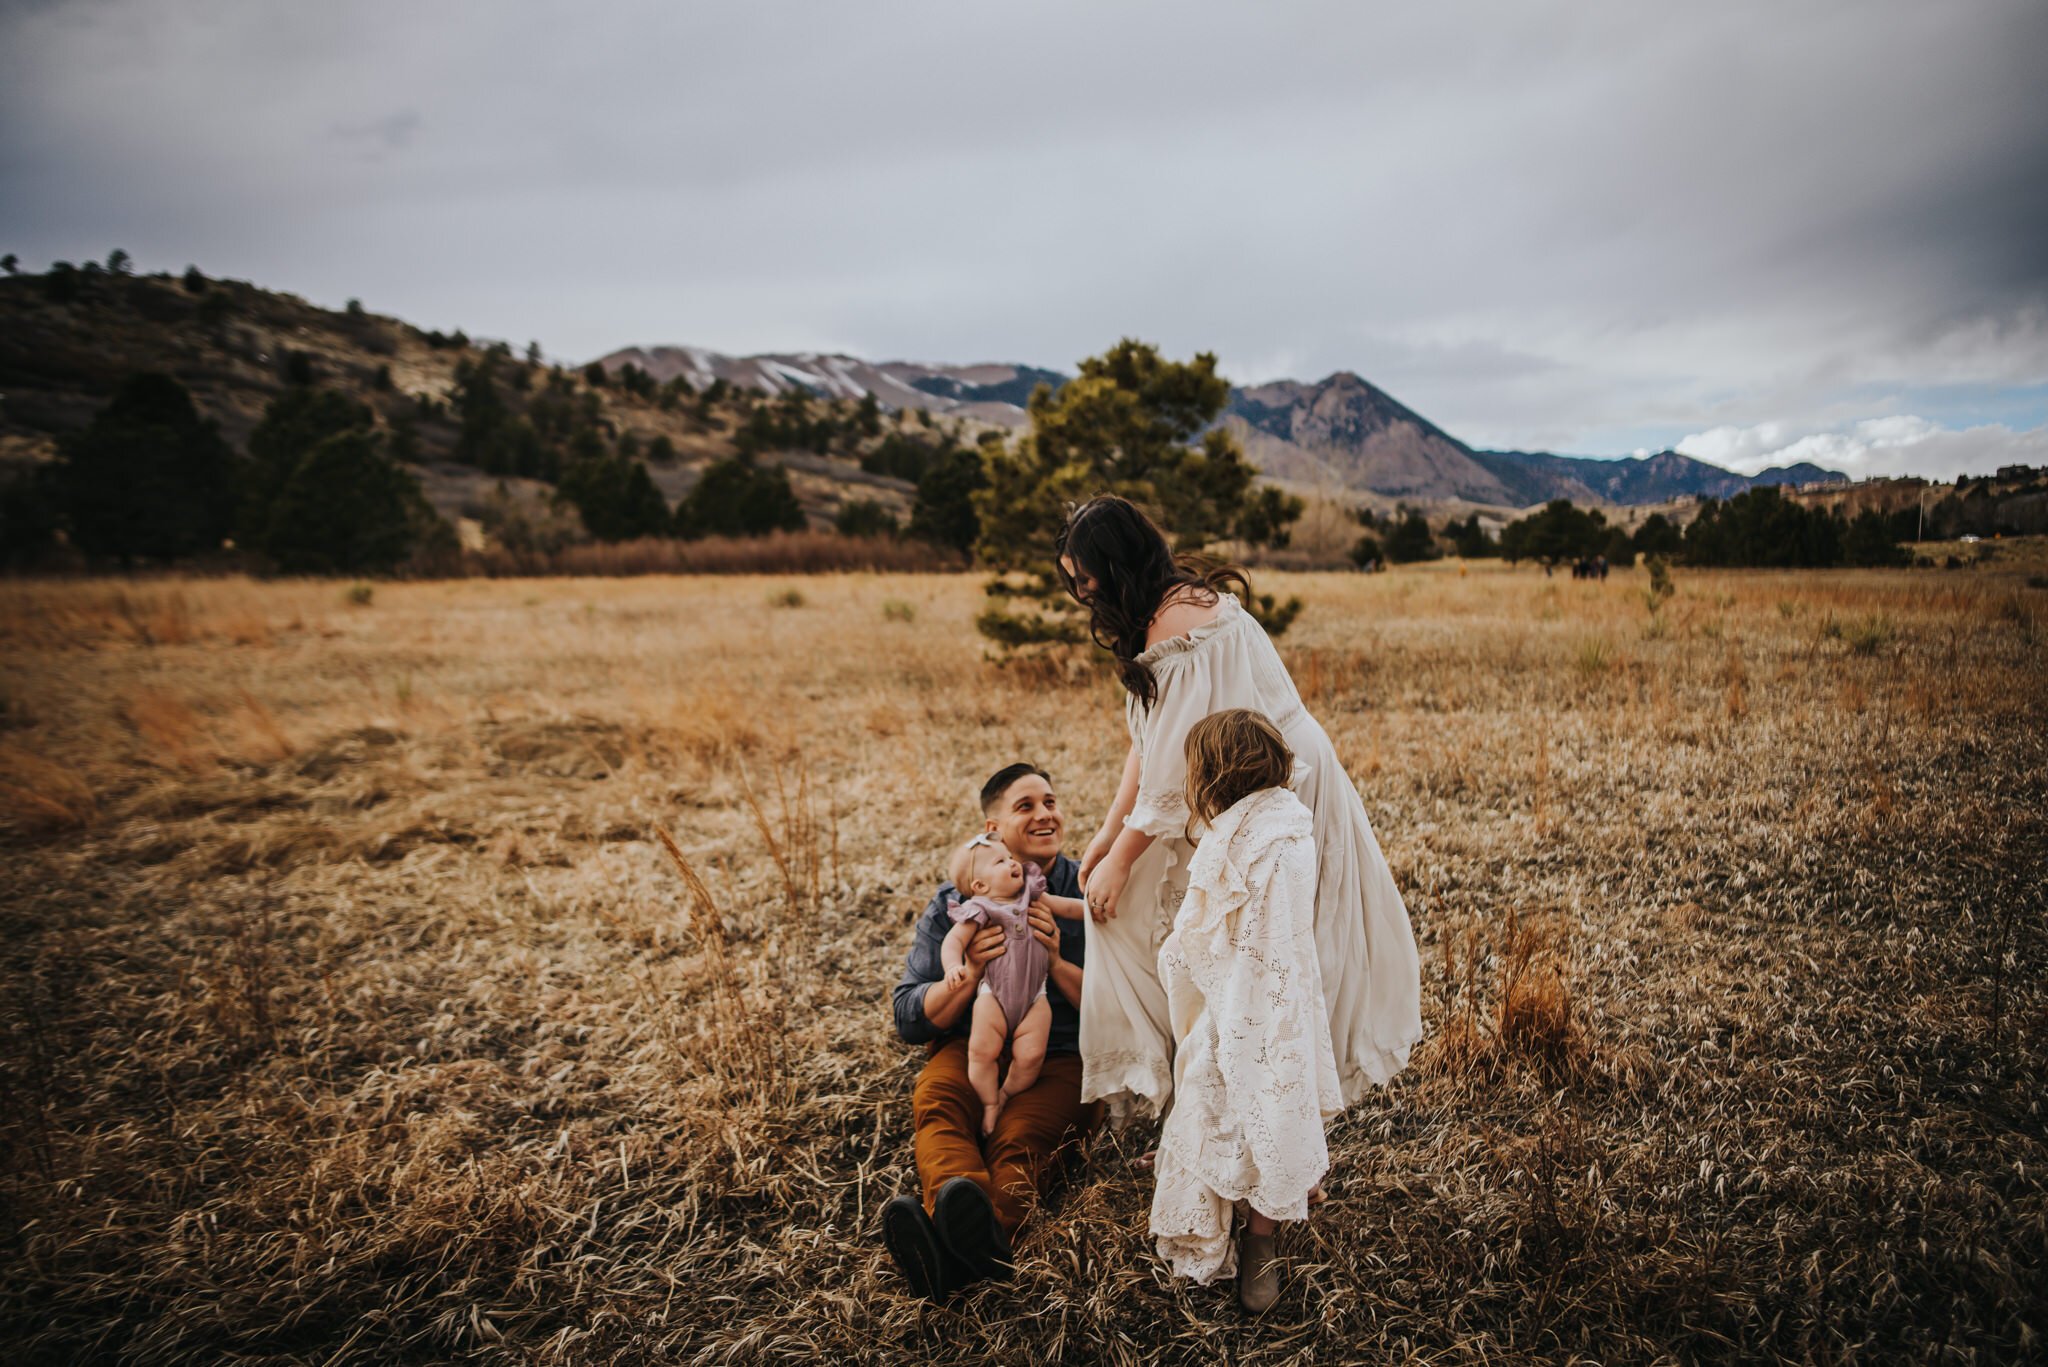 Miller+Family+Session+Mentorship+Colorado+Springs+Colorado+Sunset+Ute+Valley+Park+Mountains+Fields+Mom+Dad+Son+Daughter+Baby+Wild+Prairie+Photography-08-2020.jpeg